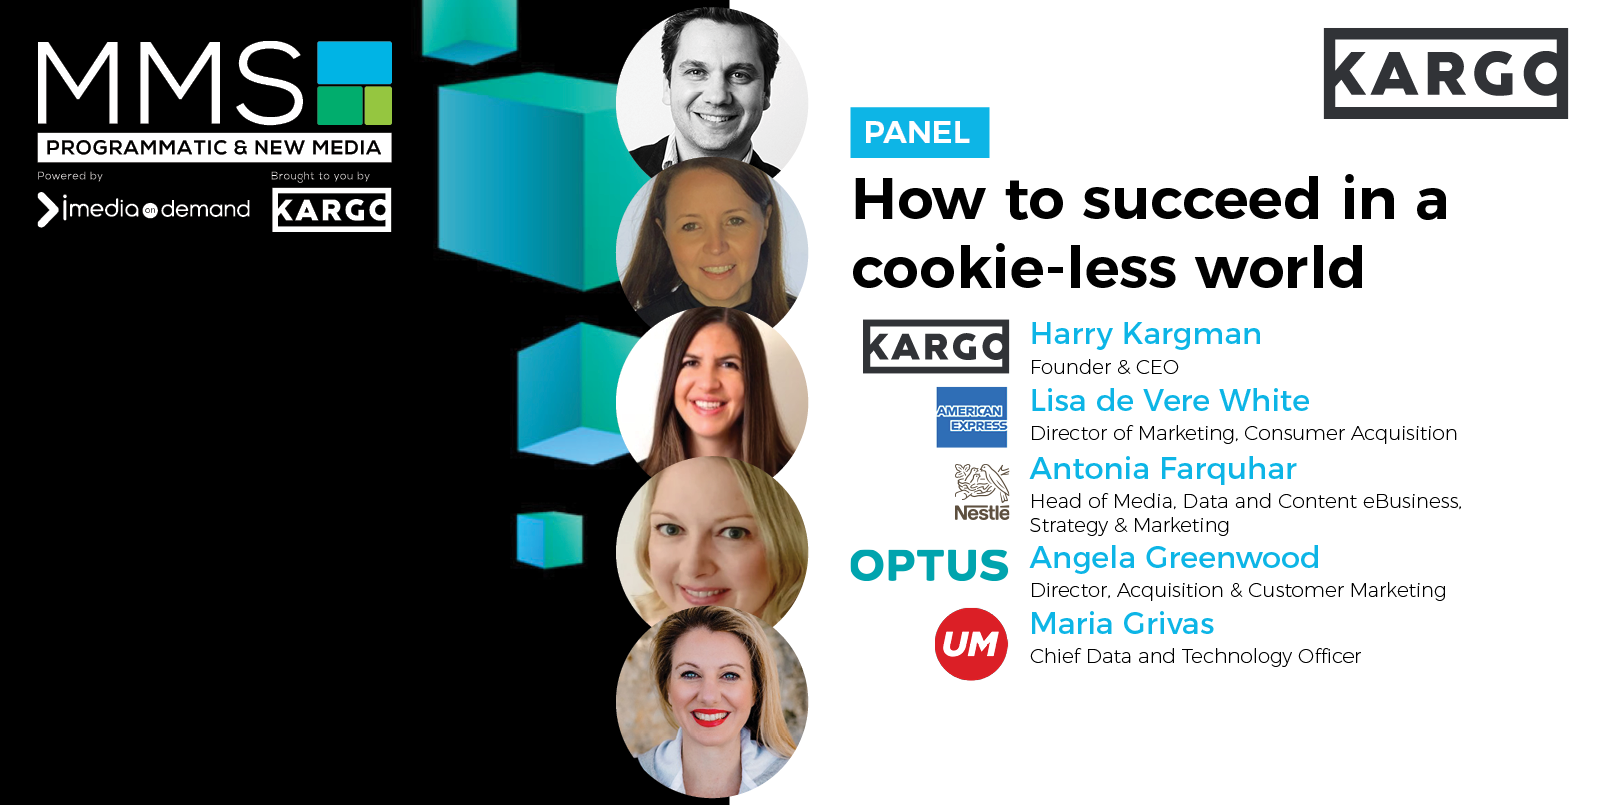 MMS Programmatic &amp; New Media How To Succeed In A Cookieless World Webinar